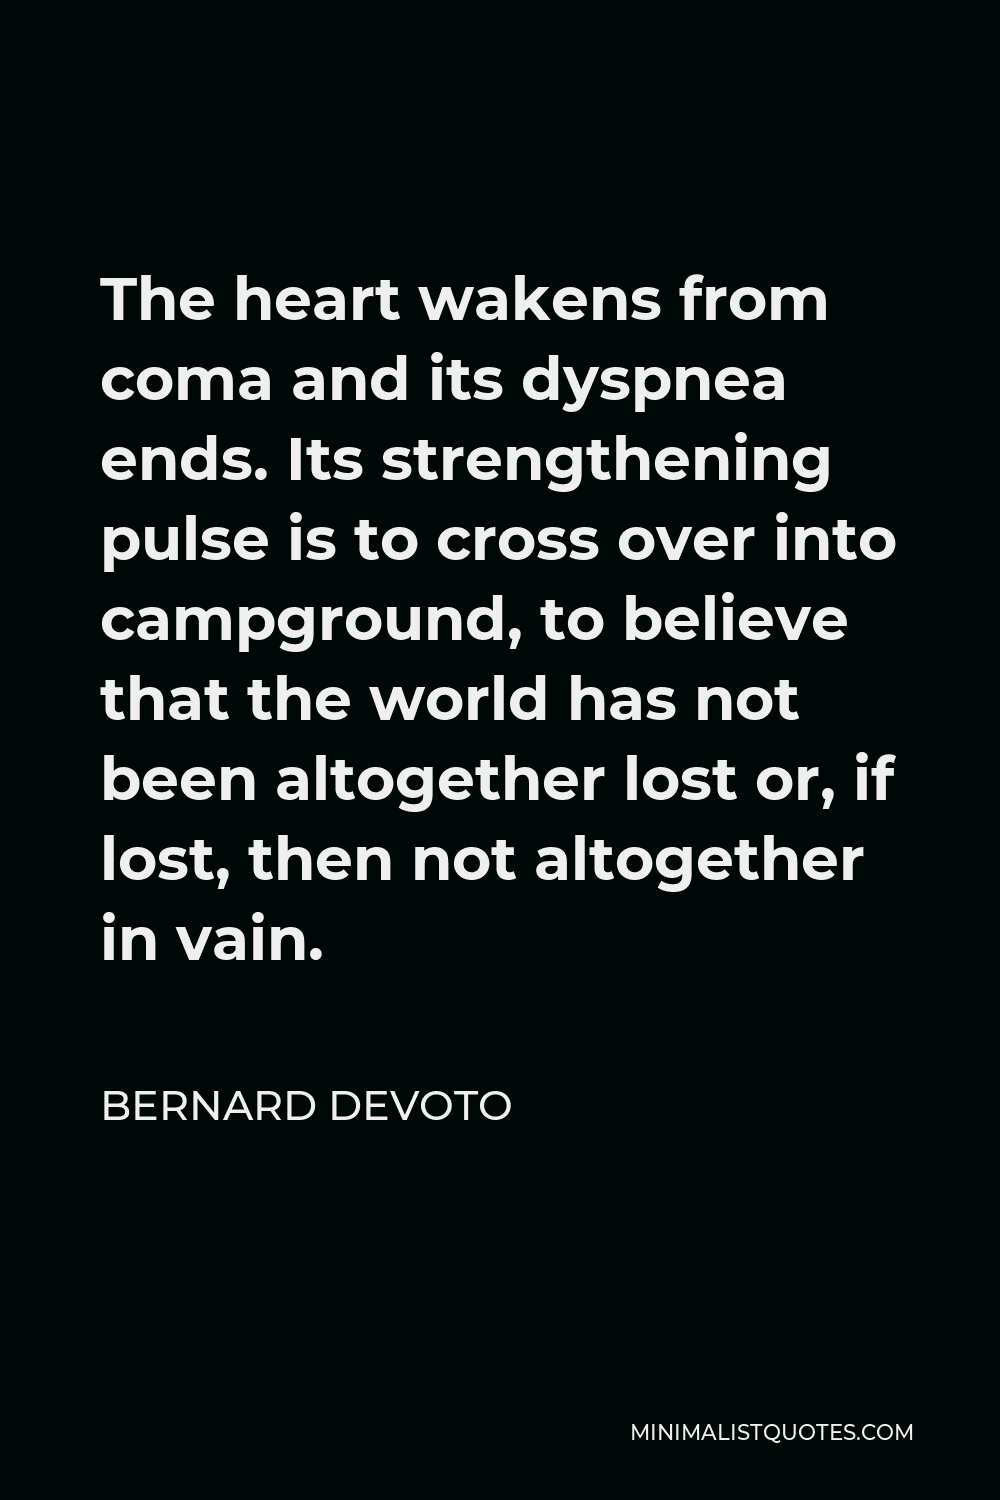 Bernard DeVoto Quote - The heart wakens from coma and its dyspnea ends. Its strengthening pulse is to cross over into campground, to believe that the world has not been altogether lost or, if lost, then not altogether in vain.